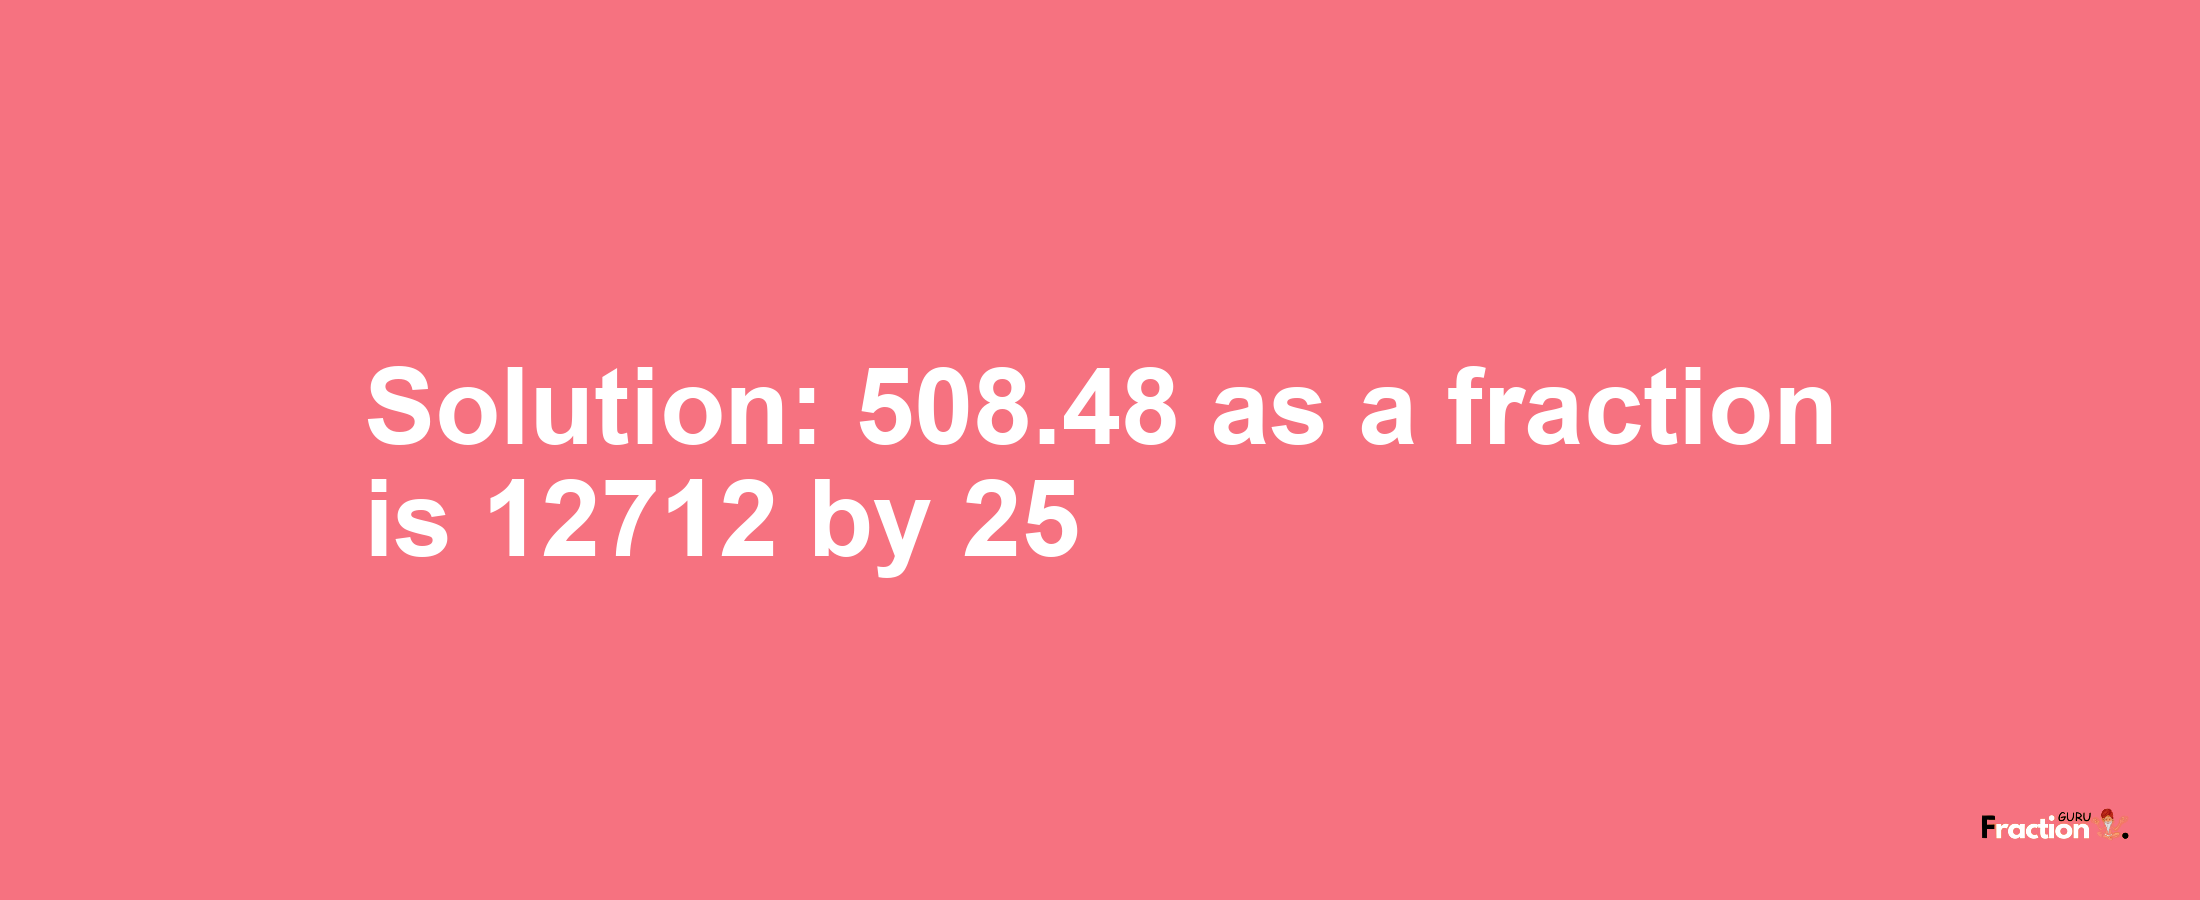 Solution:508.48 as a fraction is 12712/25